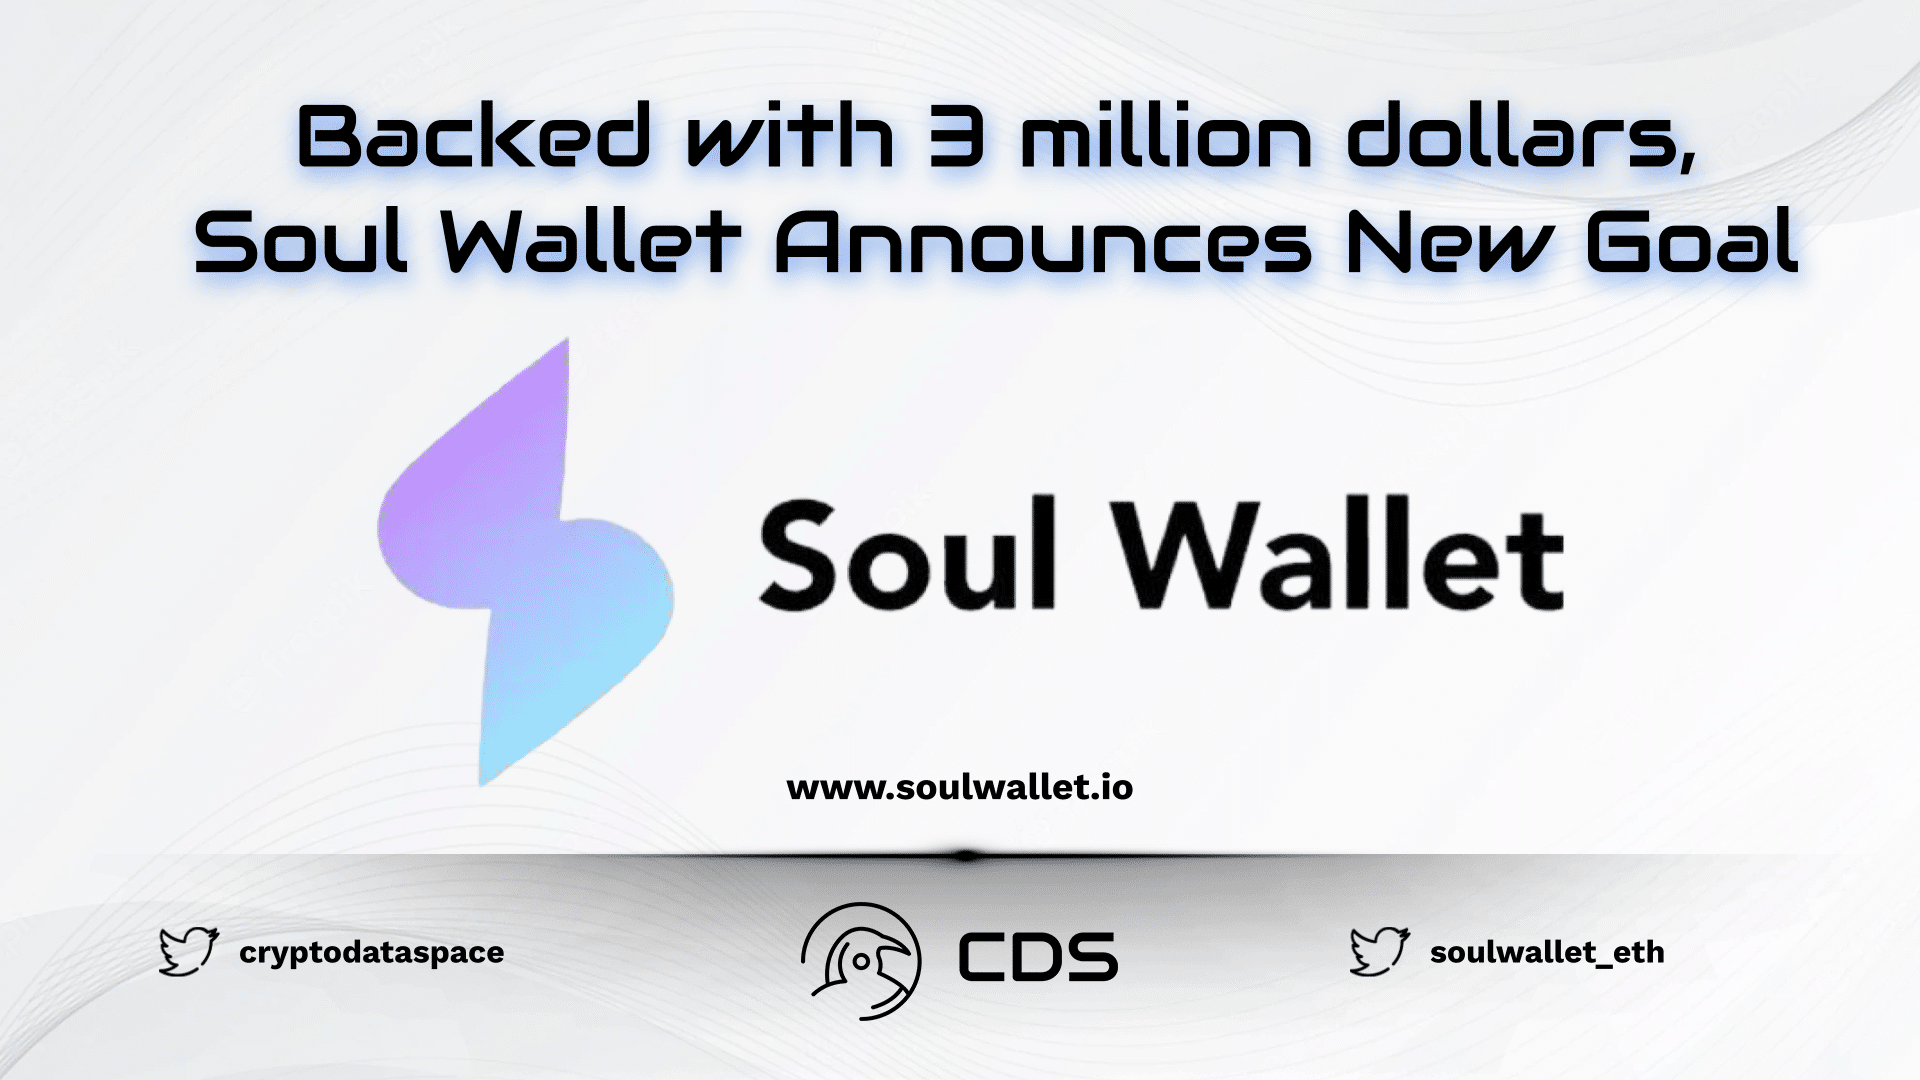 Backed with 3 million dollars, Soul Wallet Announces New Goal